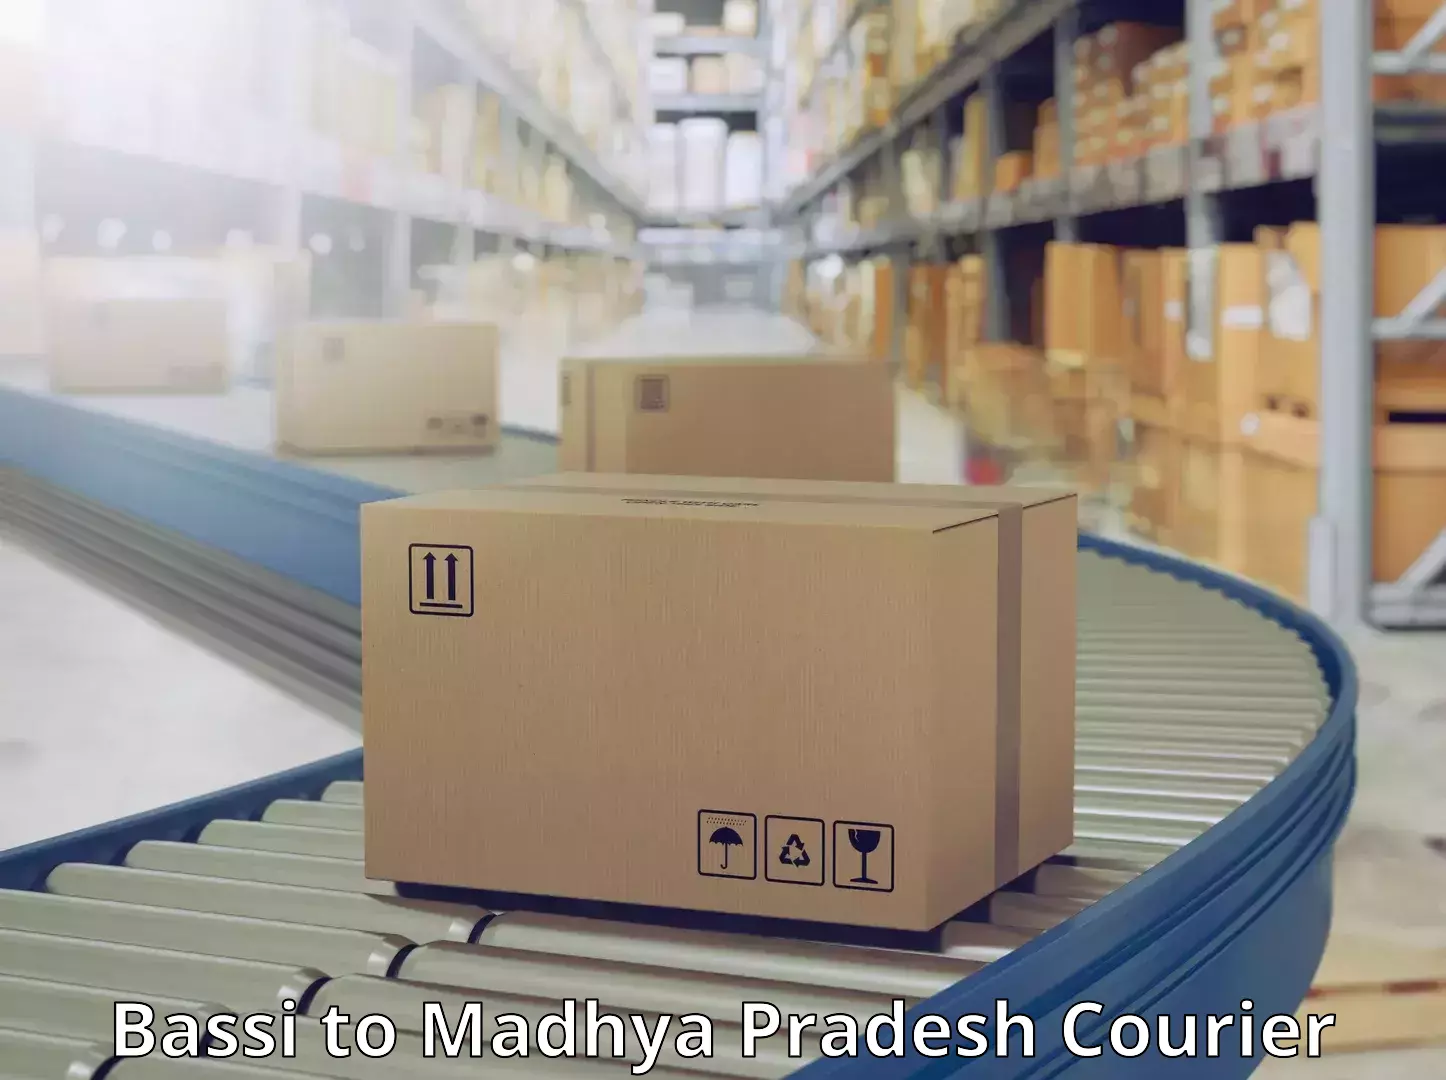 Global shipping networks in Bassi to Madhya Pradesh